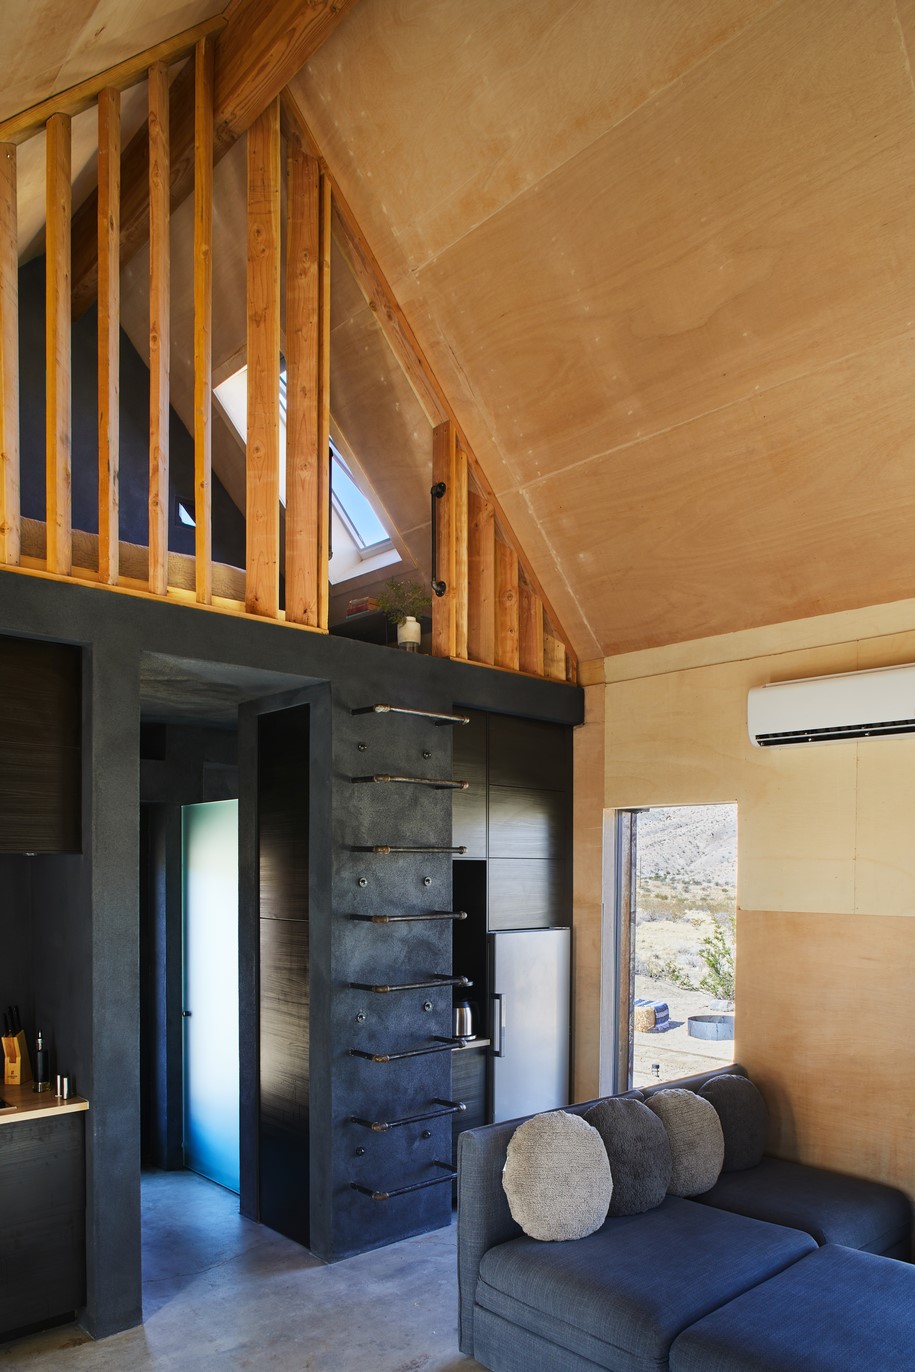 Archisearch The Folly cabin by Cohesion Studio offers the perfect off grid experience under the stars